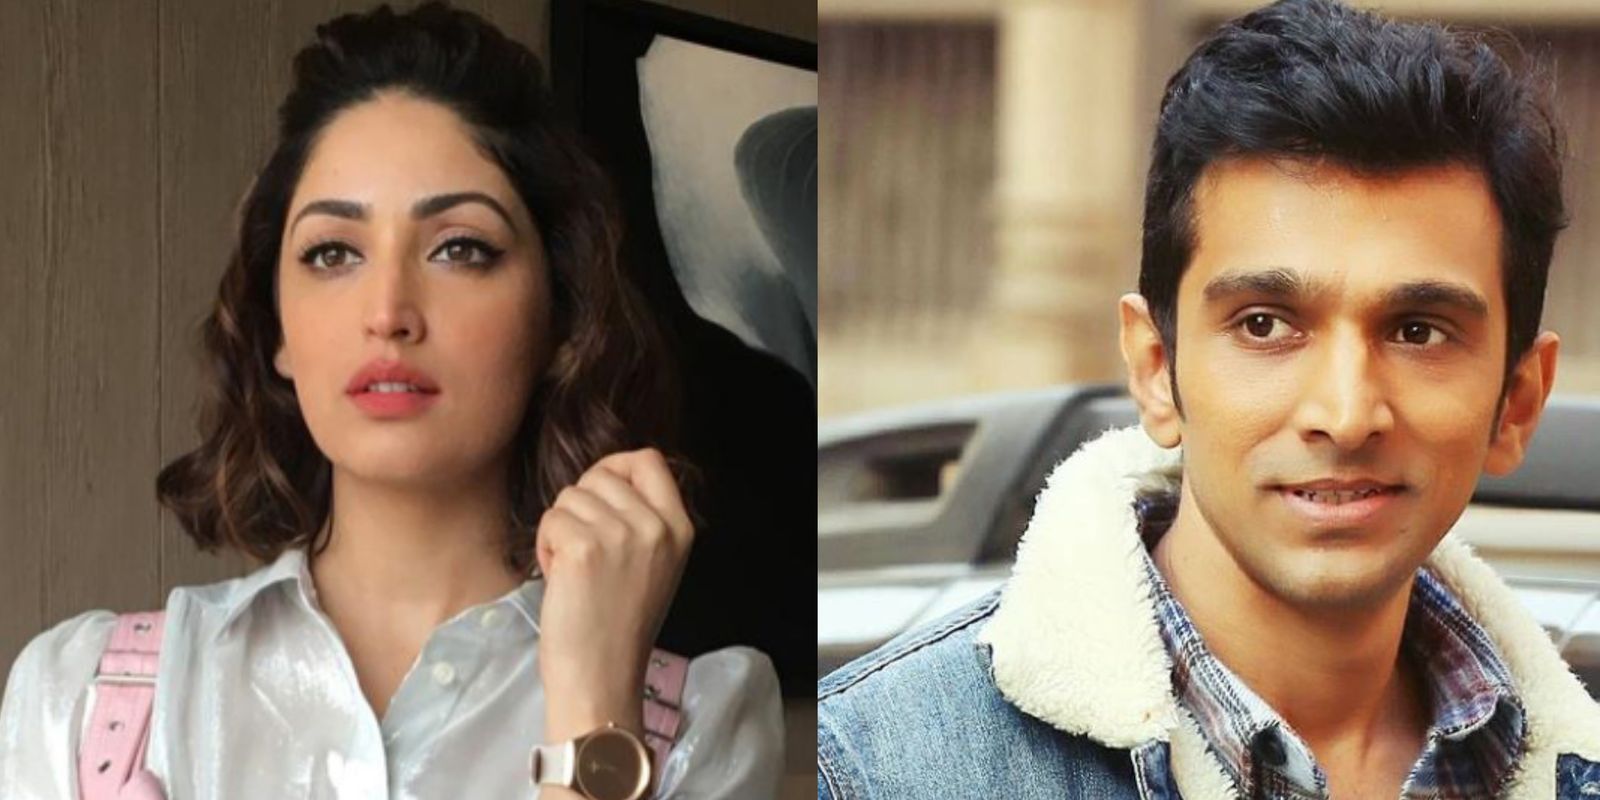 Pratik Gandhi And Yami Gautam To Team Up For A Film Produced By Ronnie Screwvala And Aditya Dhar? Here's What We Know